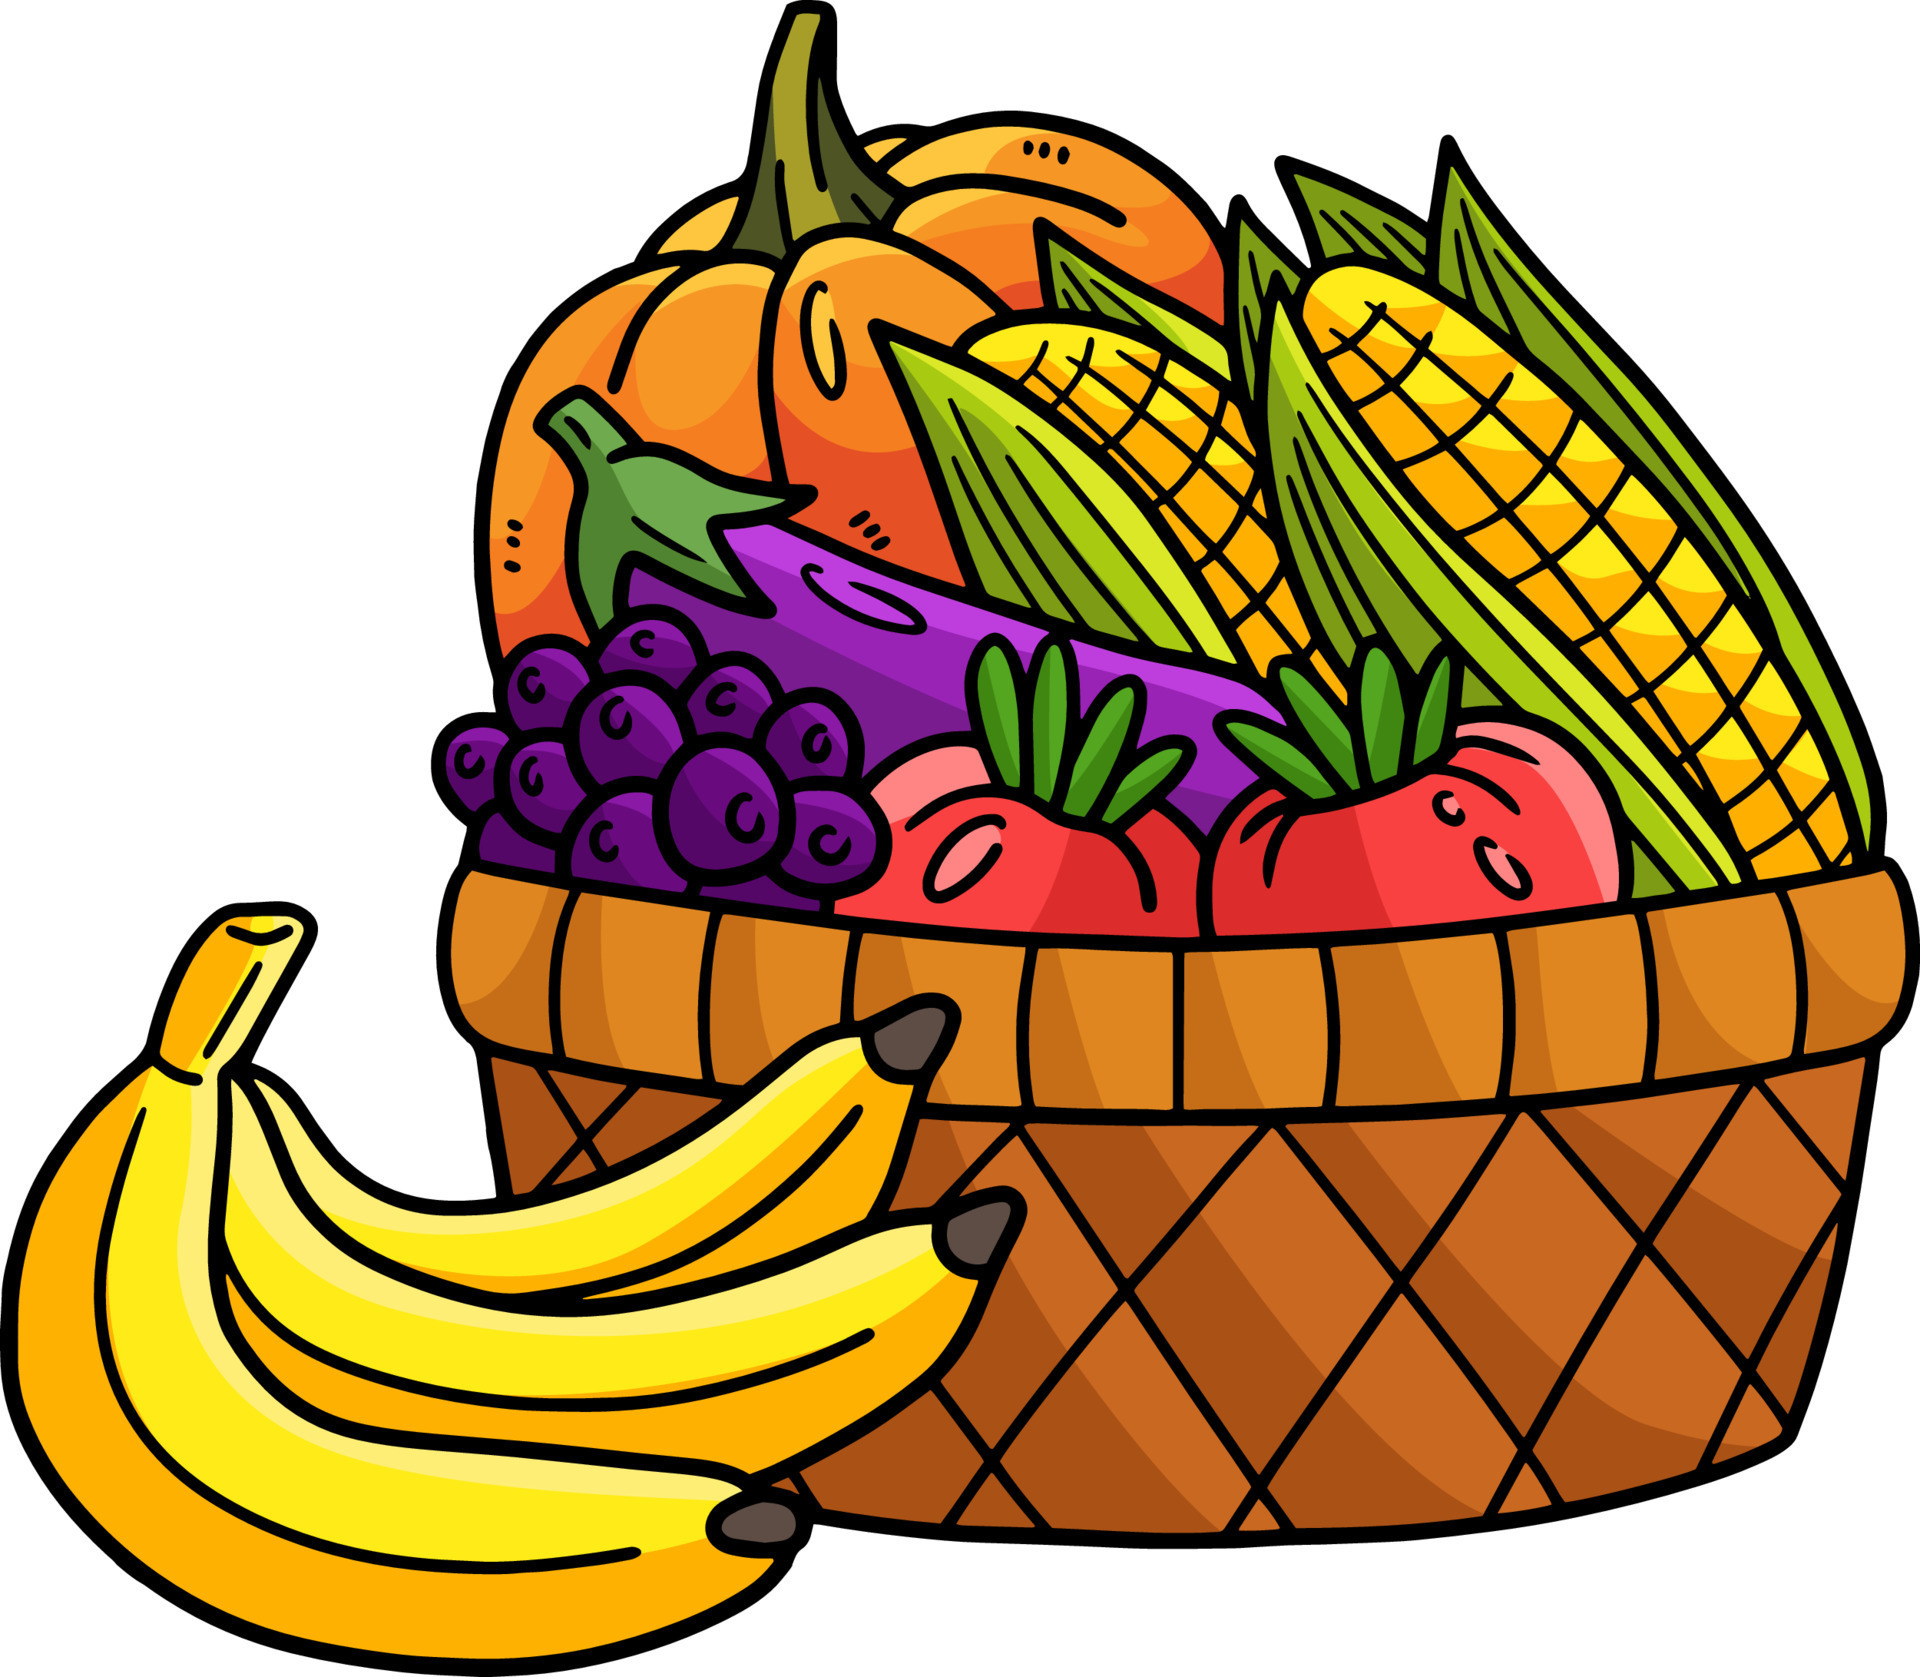 Fruits in the Basket Cartoon Colored Clipart 11770212 Vector Art at ...